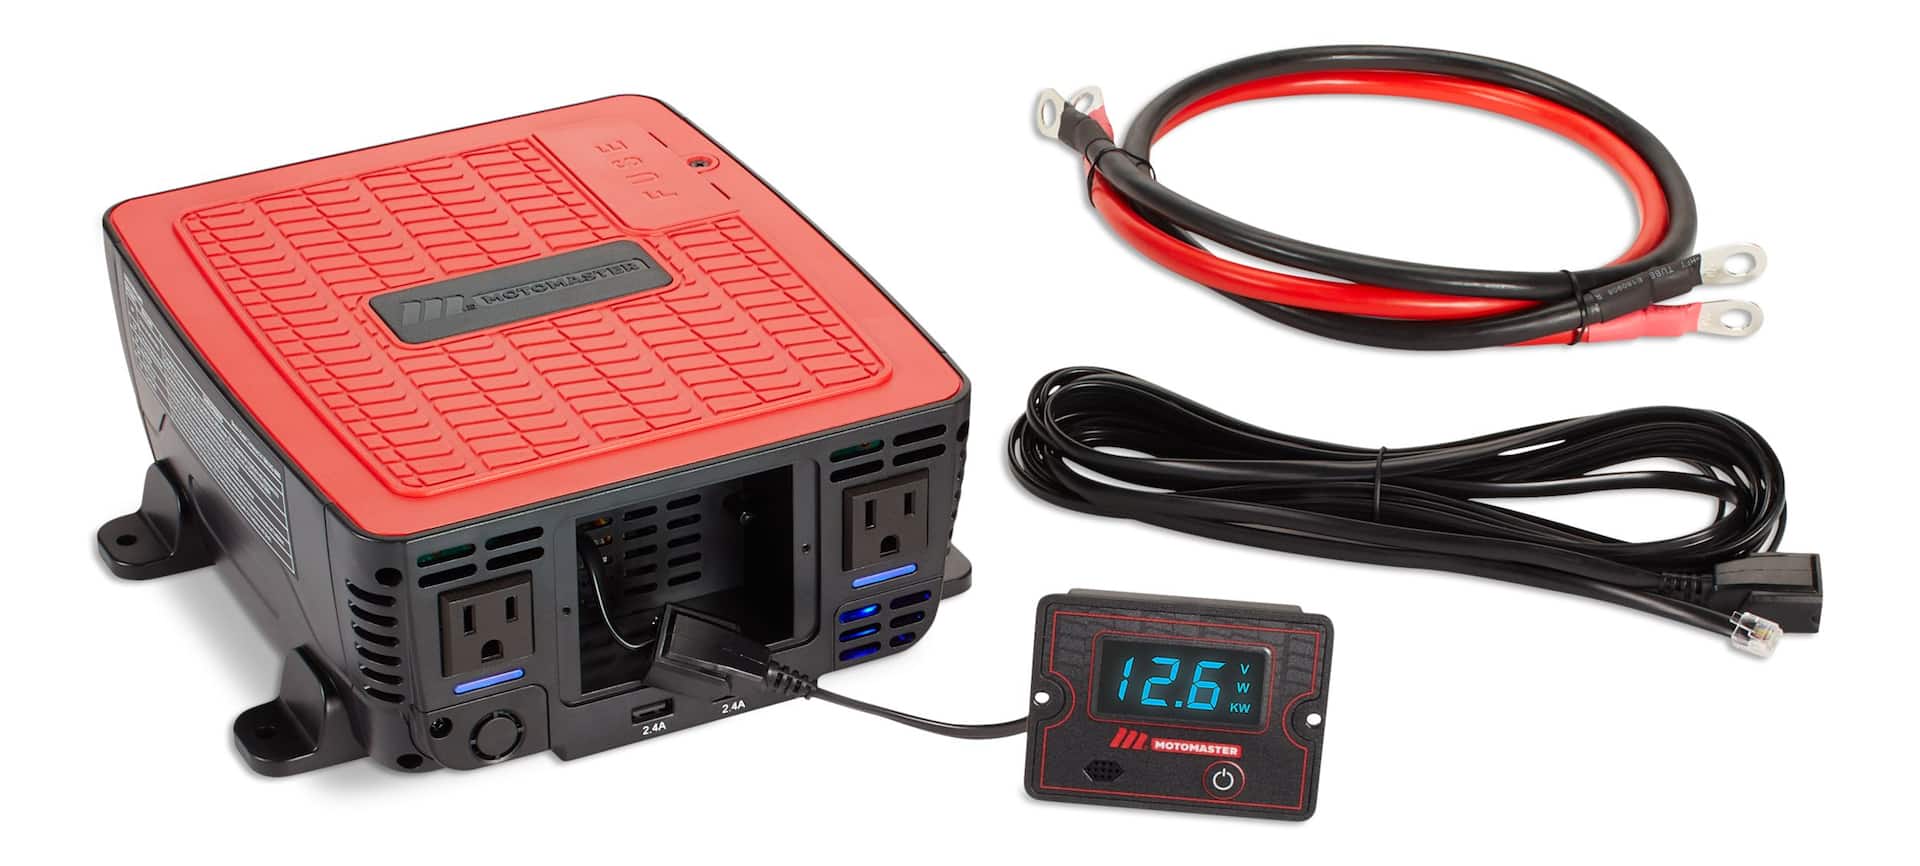 MotoMaster 750W Power Inverter with LCD Screen, Grey